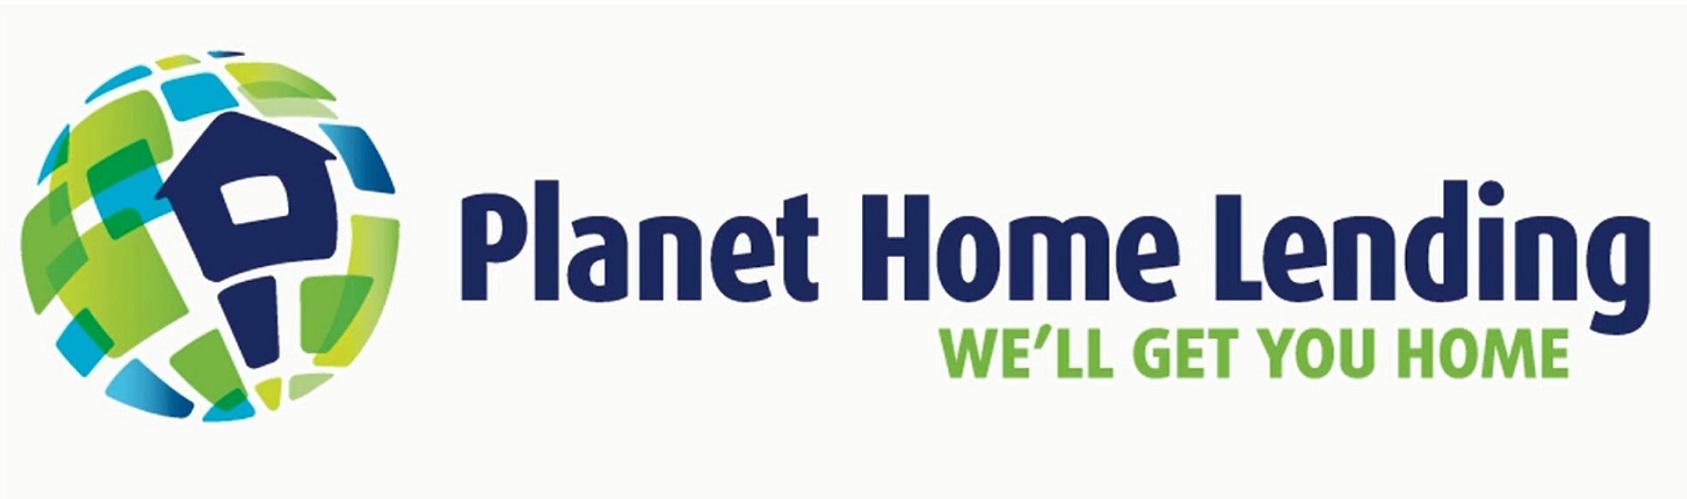 Planet Home Lending has announced Muthu Srinivasan is the company’s new chief technology officer (CTO) and that Jeffrey Ratter has joined the company as chief information officer (CIO)